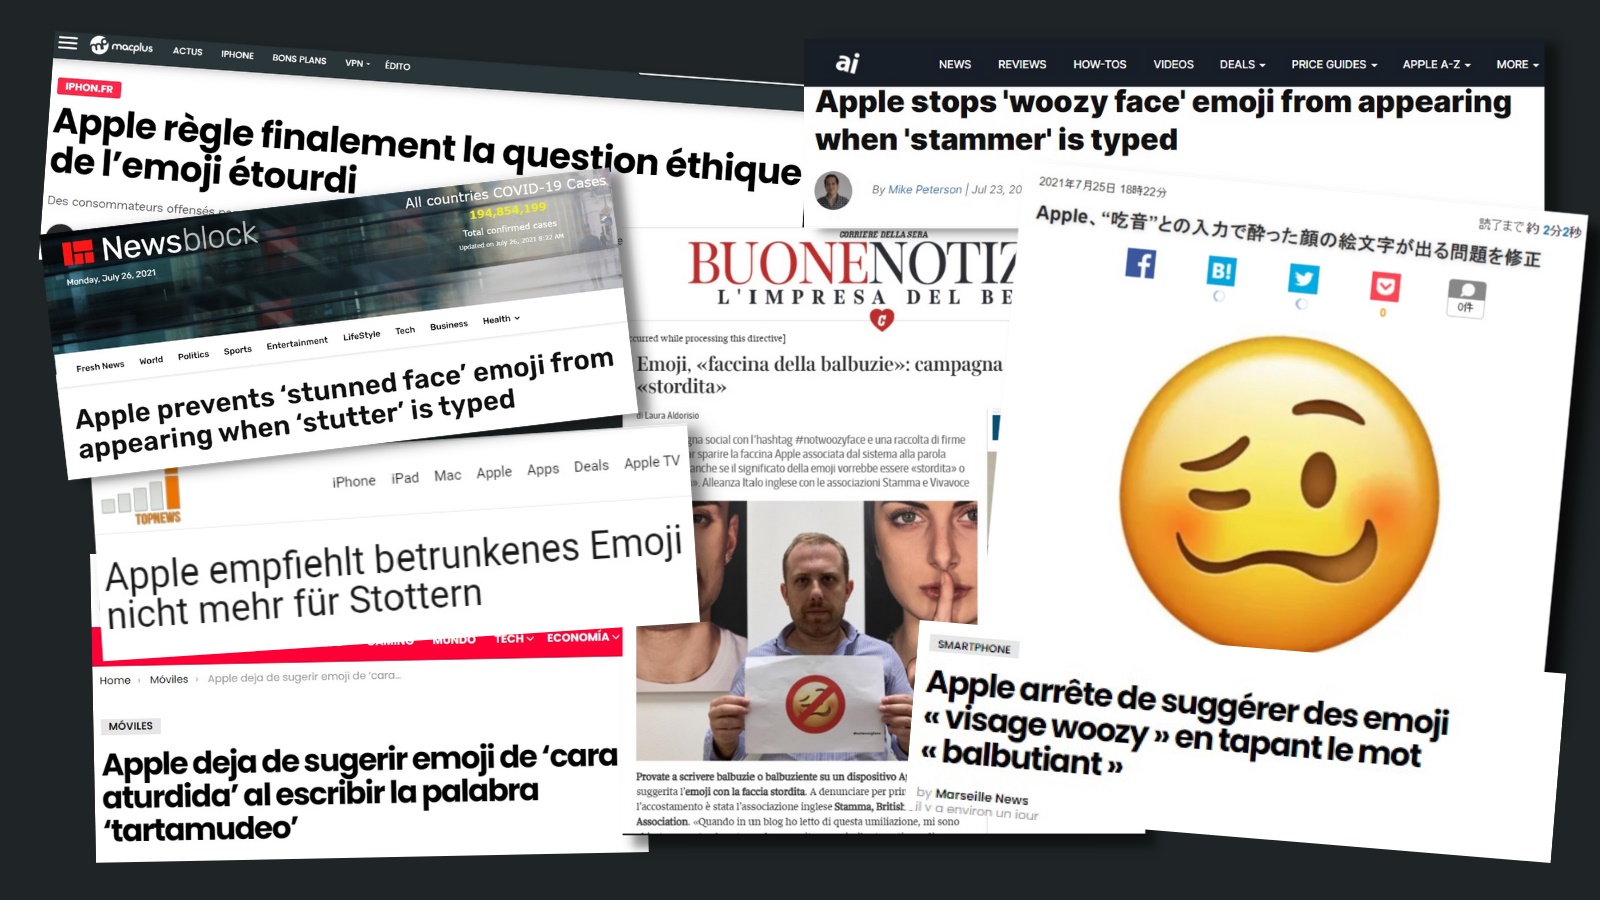 A selection of news article headlines from around the world, reporting that Apple have stopped linking the woozy face emoji to stammering